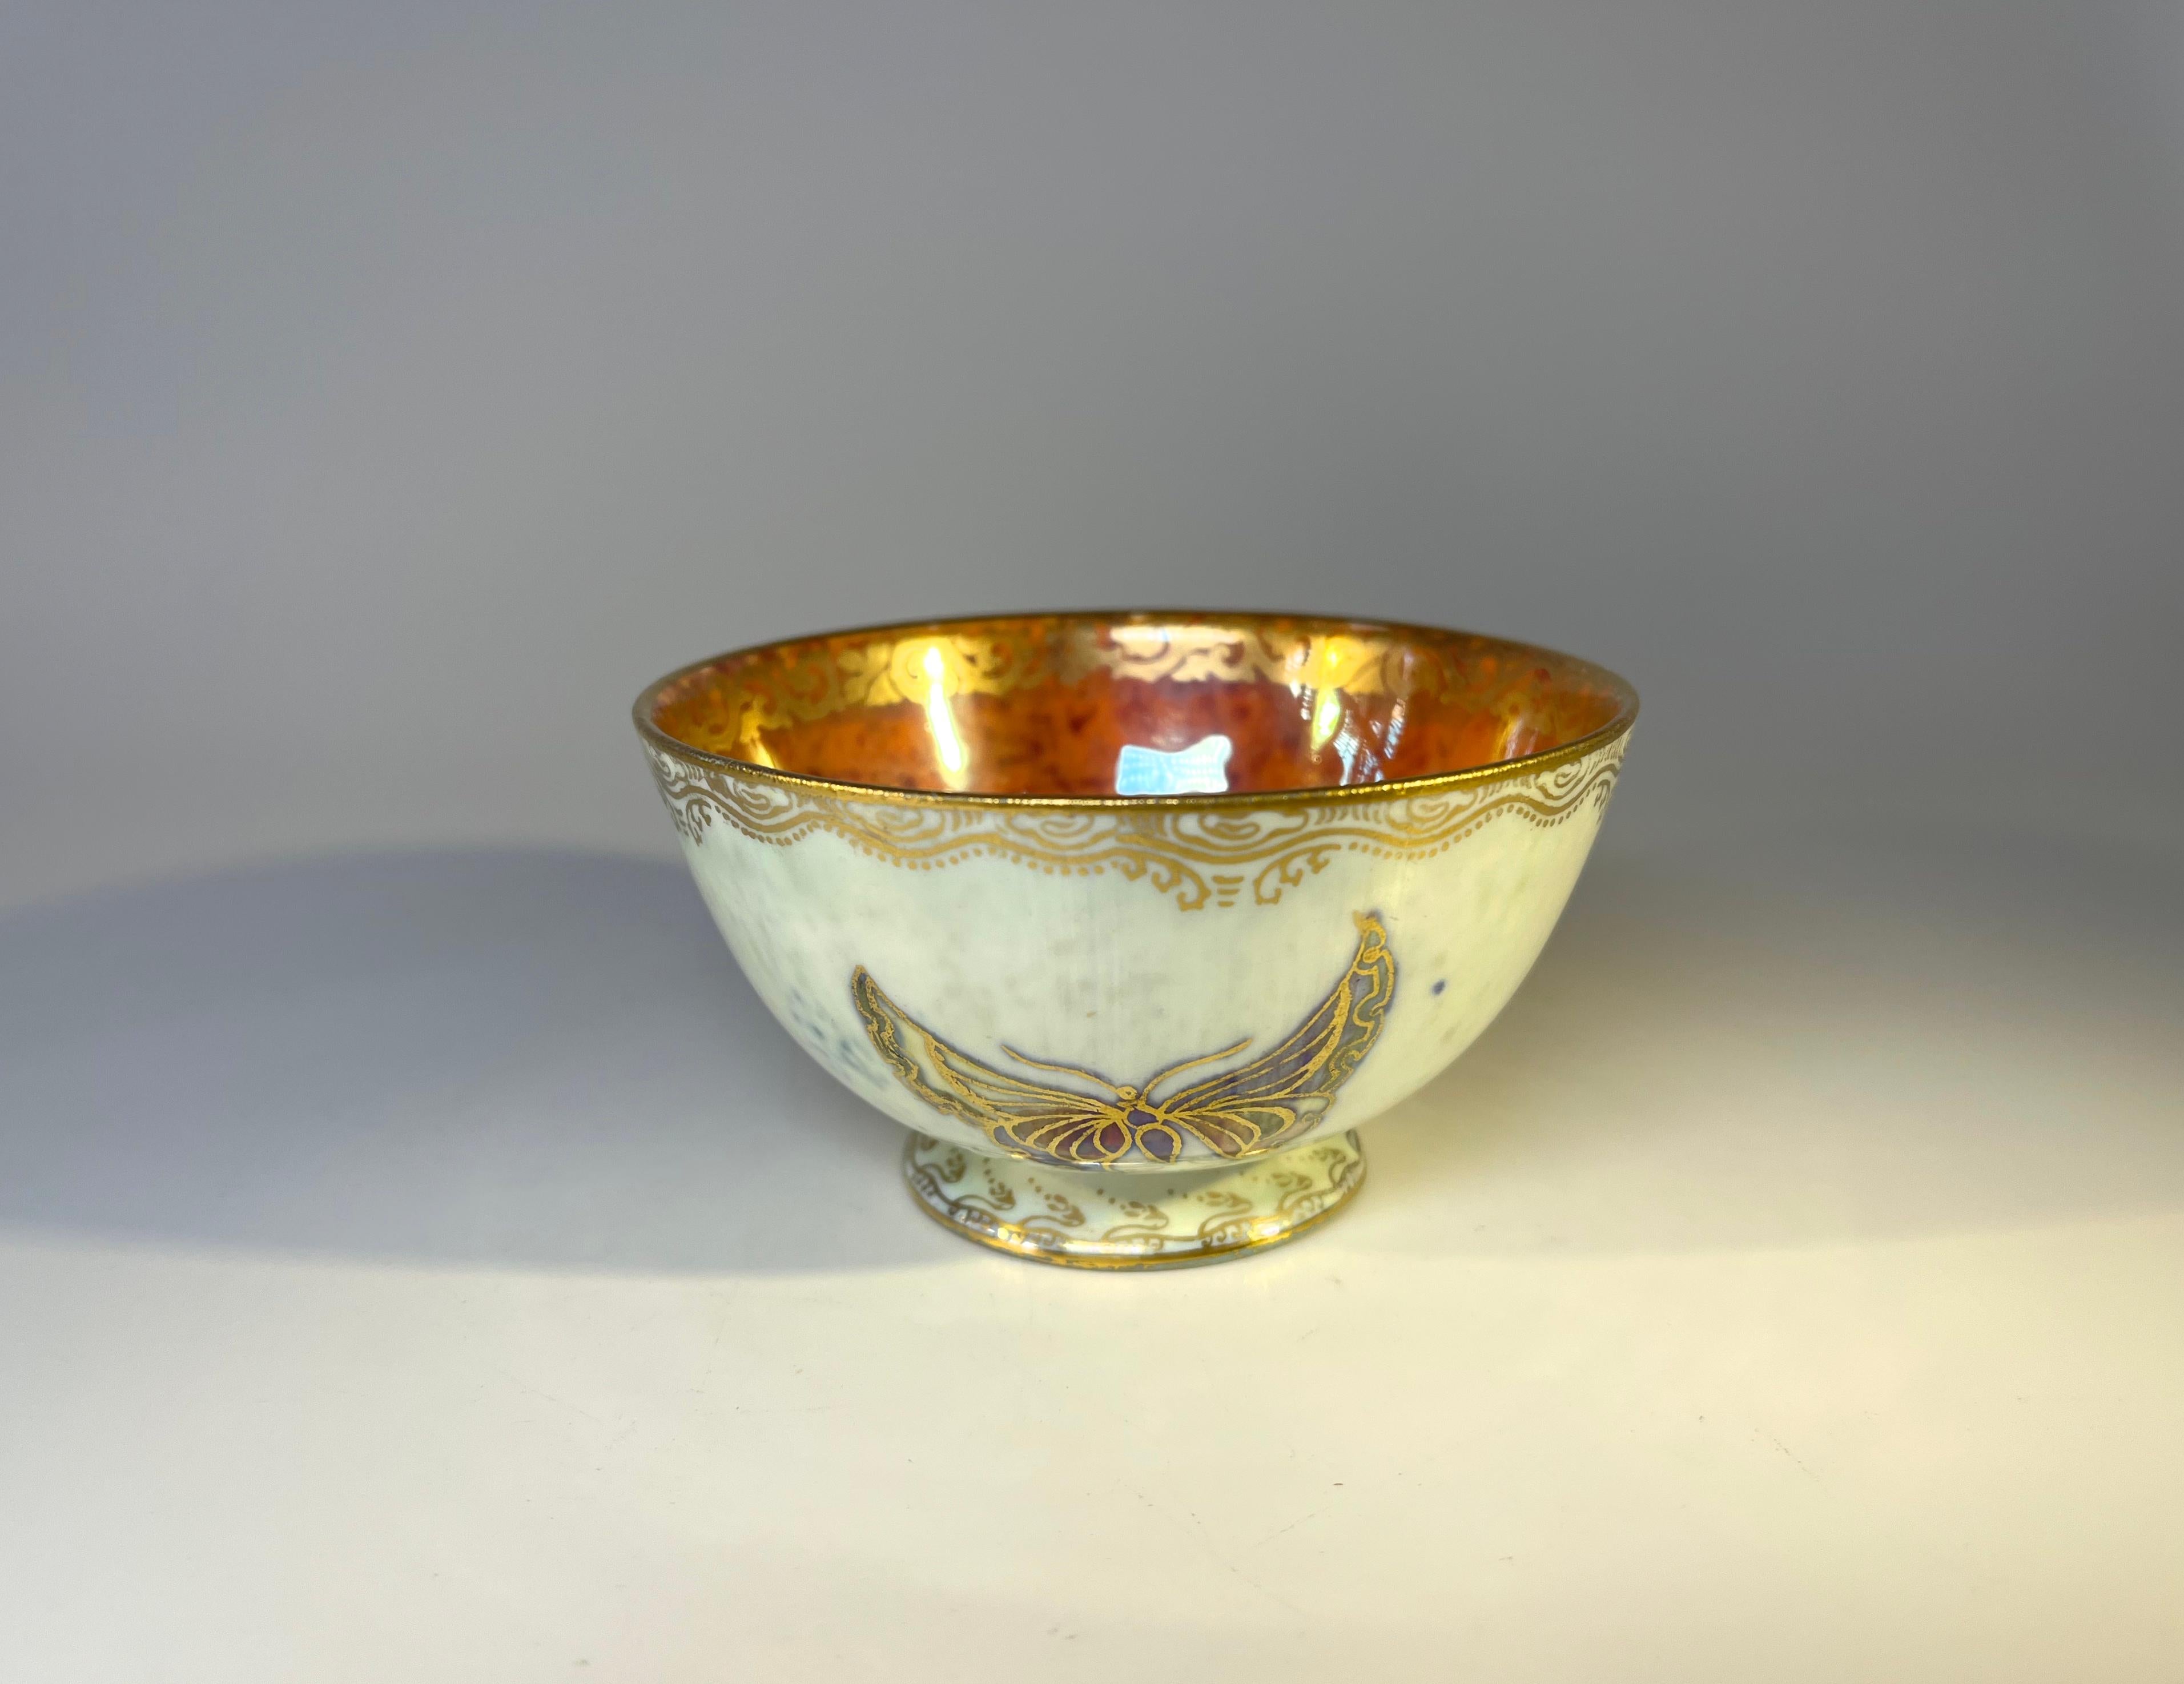 Bone china Ordinary York cup by Daisy Making-Jones for Wedgwood
Decorated on the outer with a trio of hand painted and gilded butterflies, a ground of cream pearl lustre and gilded filigree rim.
The inner has a vivid orange mottled ground, surpassed